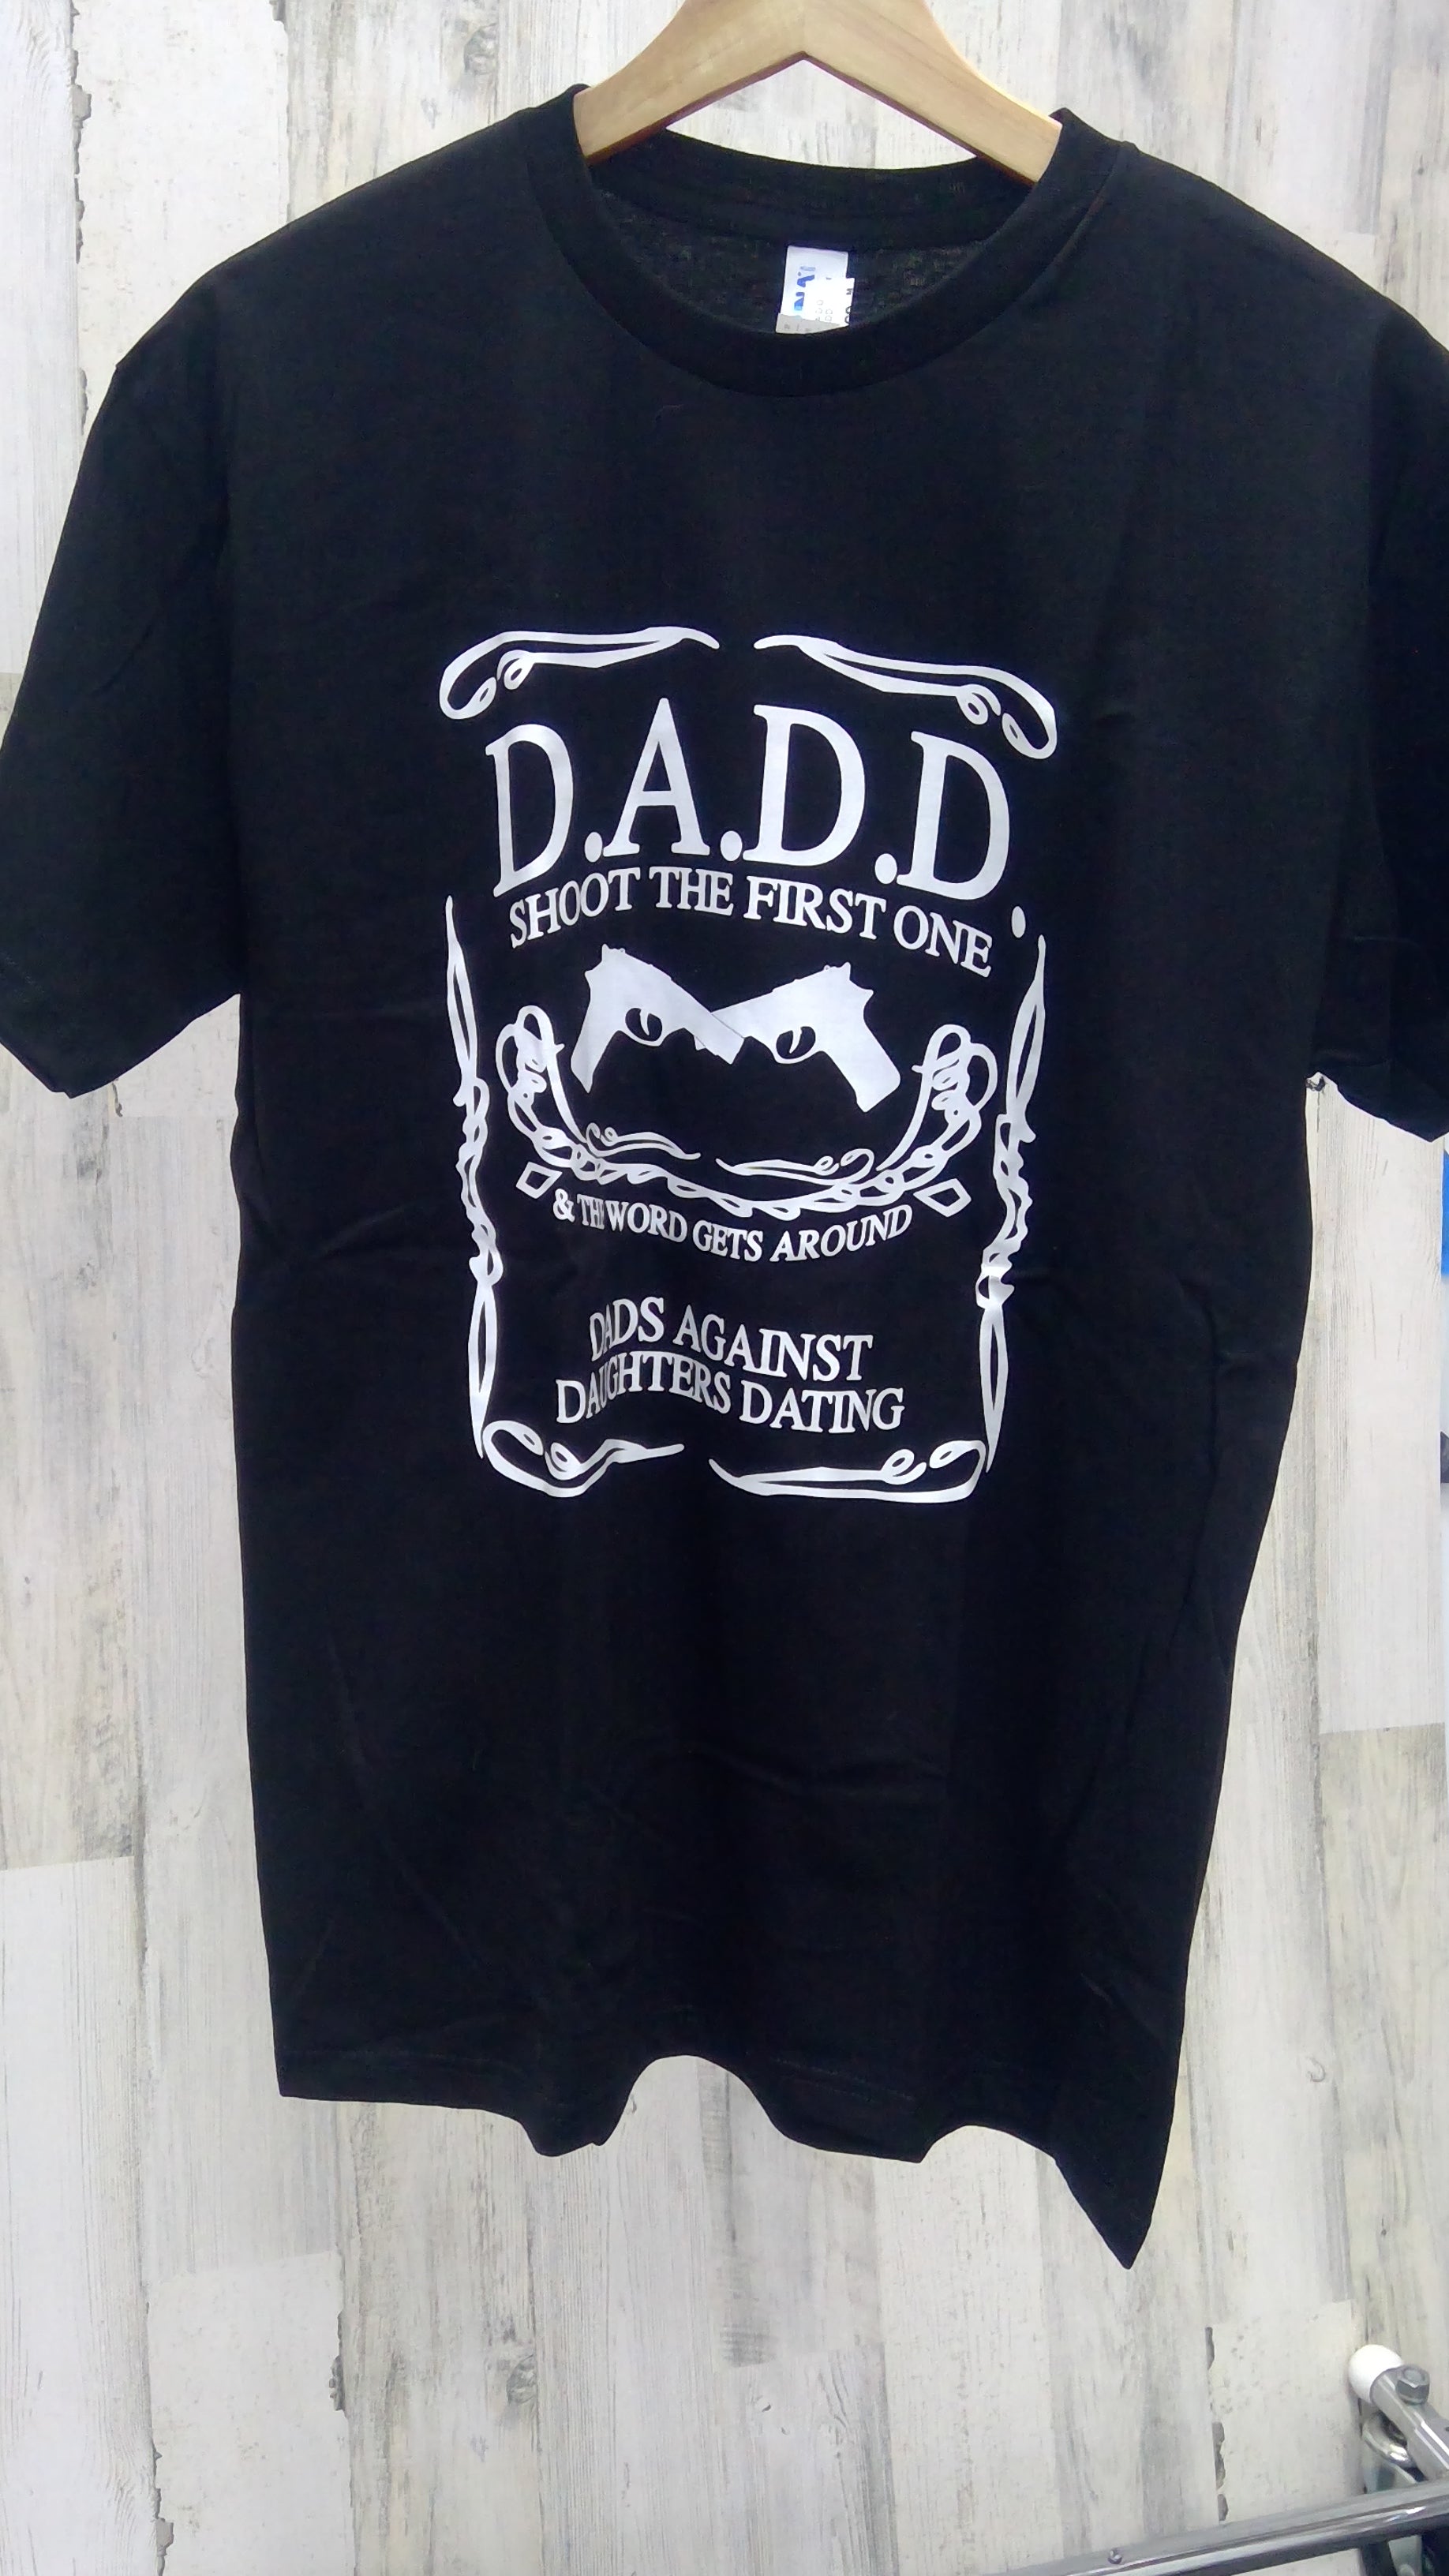 T Shirt D.A.D.D. - Dads Against Daughters Dating-hotRAGS.com